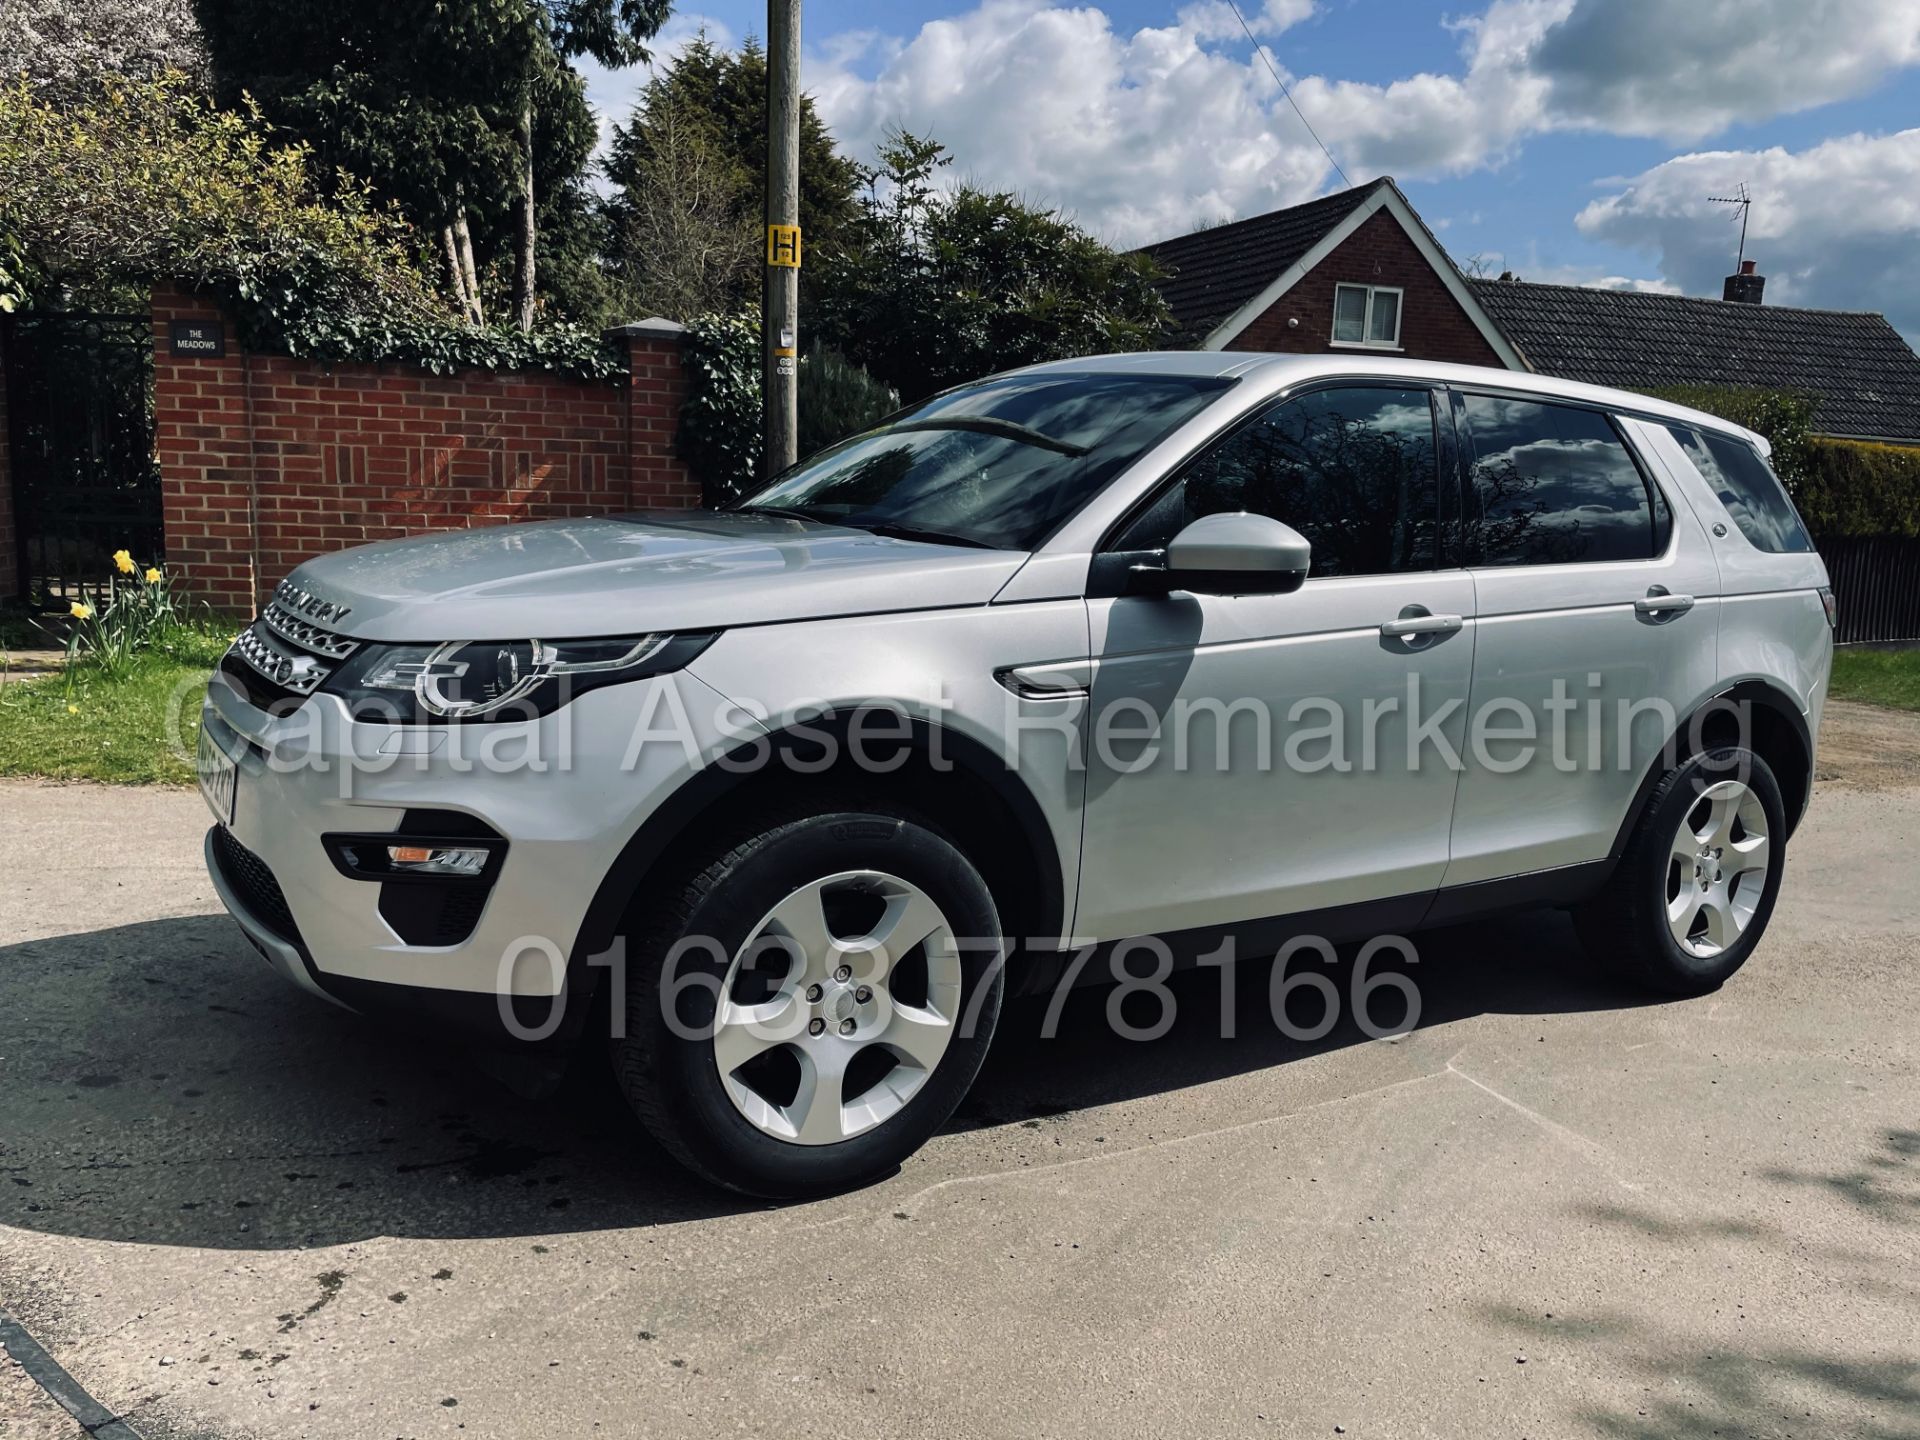 (On Sale) LAND ROVER DISCOVERY SPORT *HSE* SUV (66 REG - 2.0 TD4) *LEATHER - PAN ROOF - SAT NAV* - Image 7 of 55